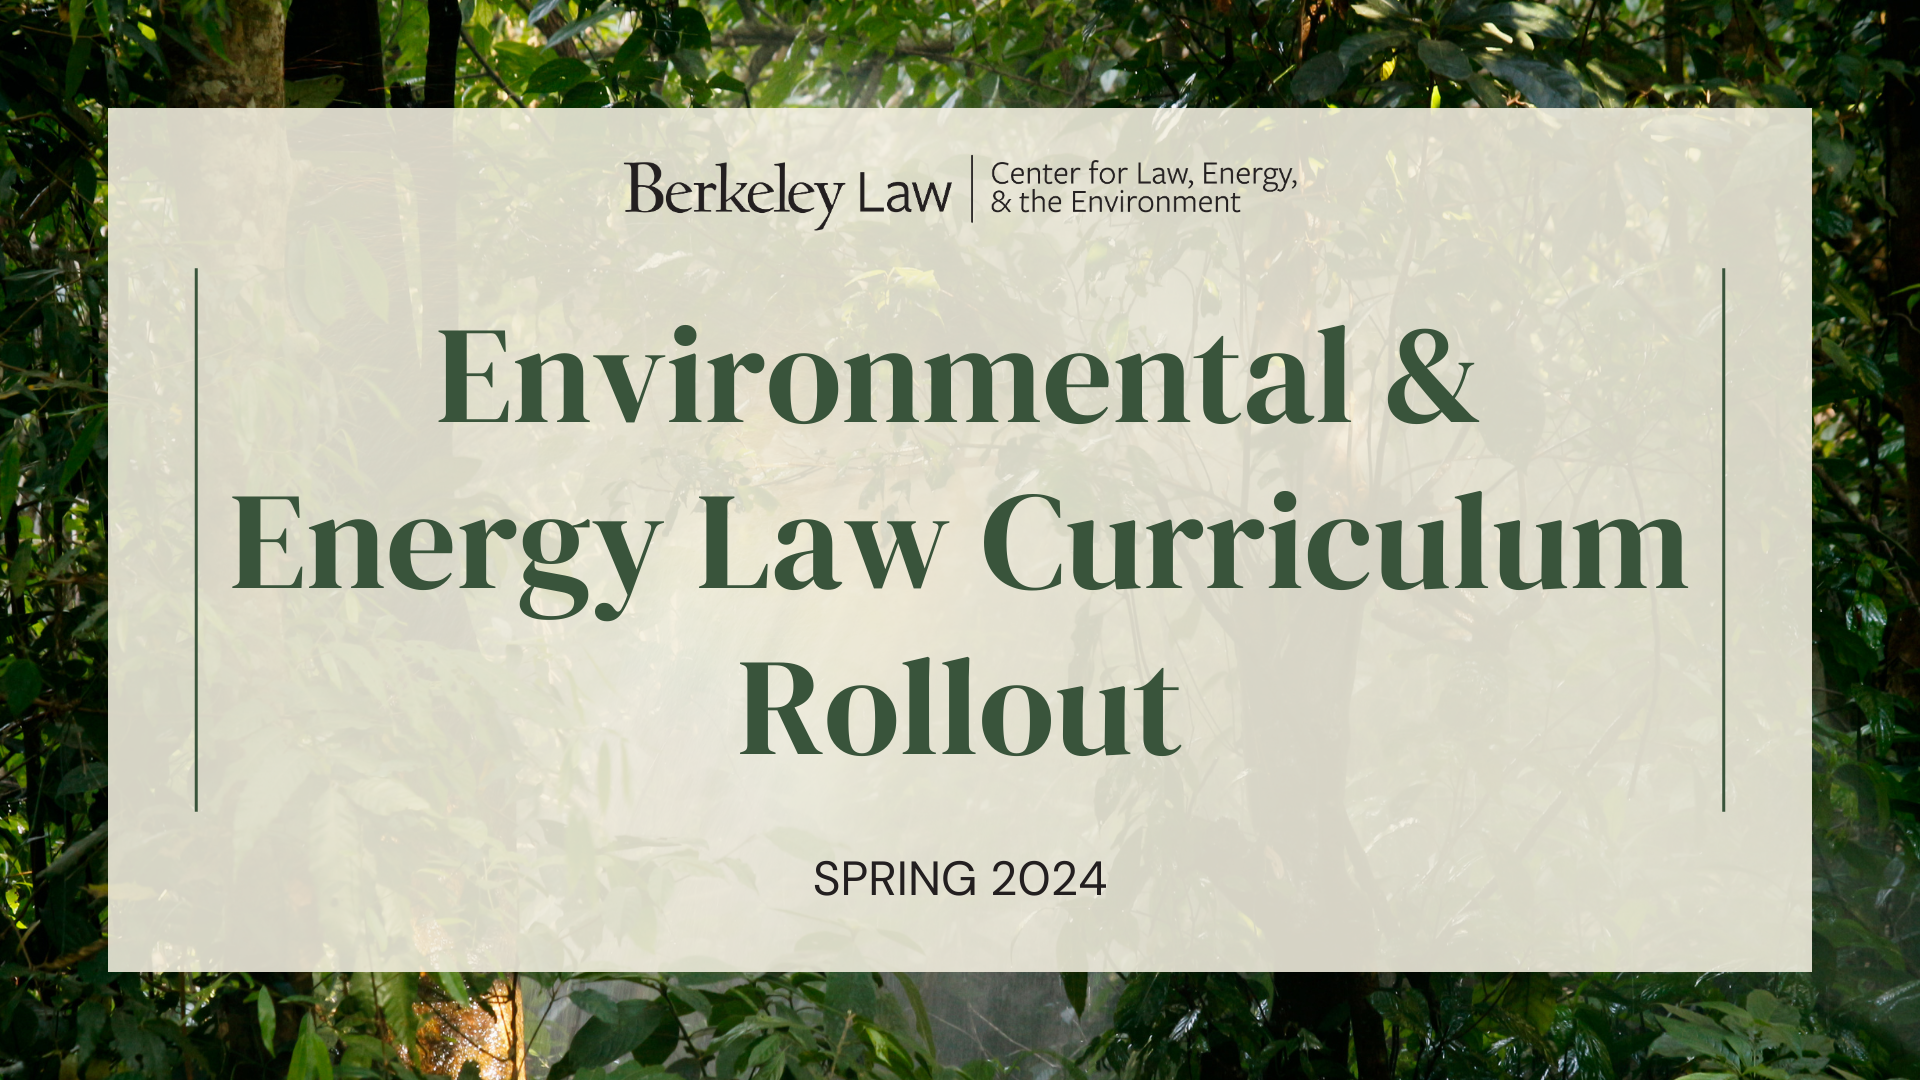 Flyer that says "Environmental & energy law curriculum rollout spring 2024"